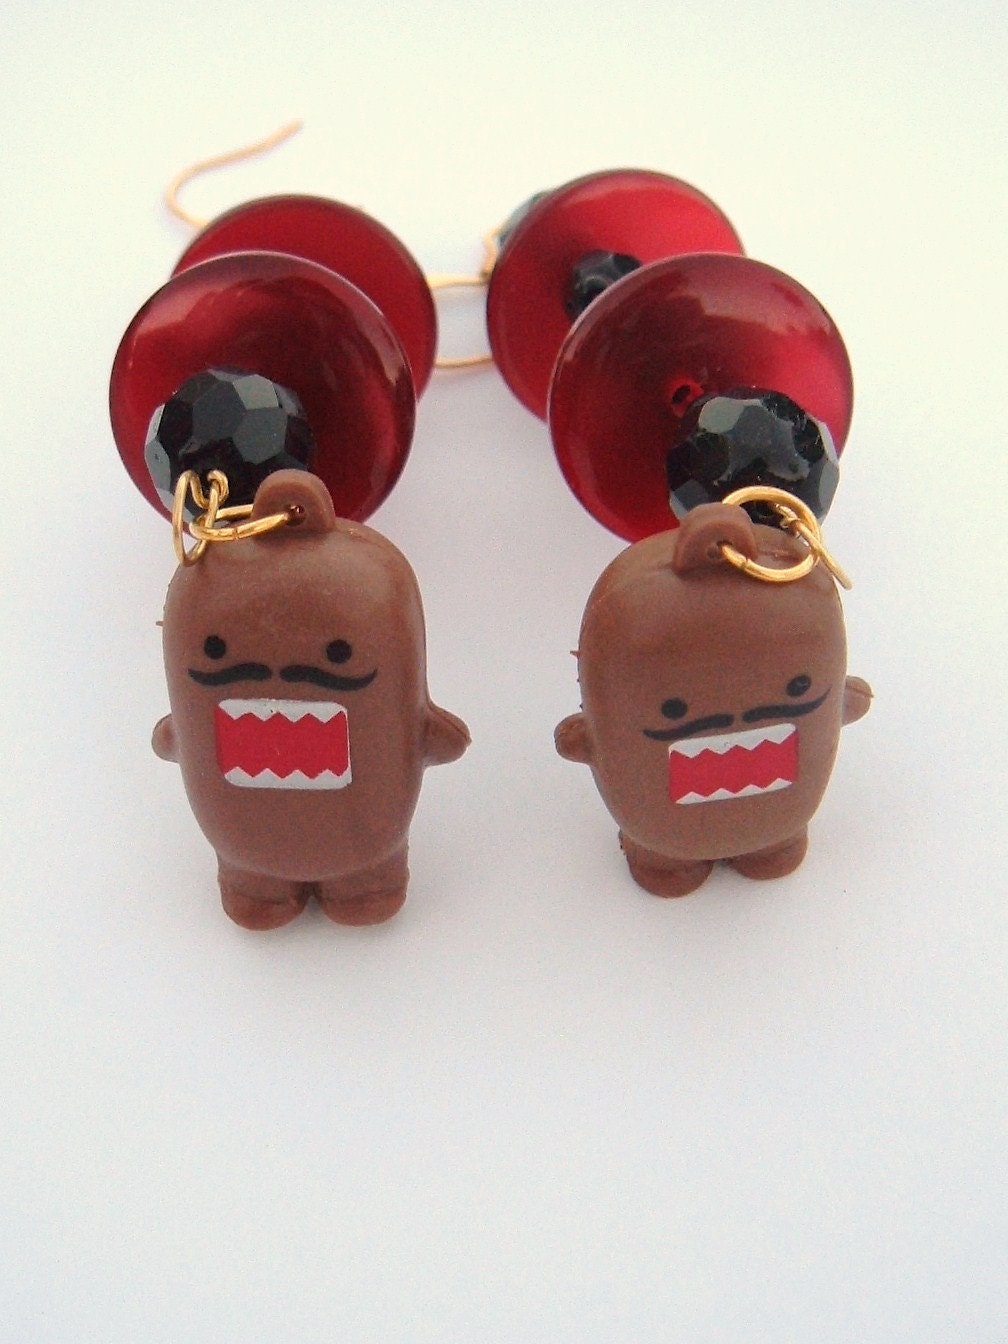 Domo earrings recycled vintage kitsch mustache red and black danglers